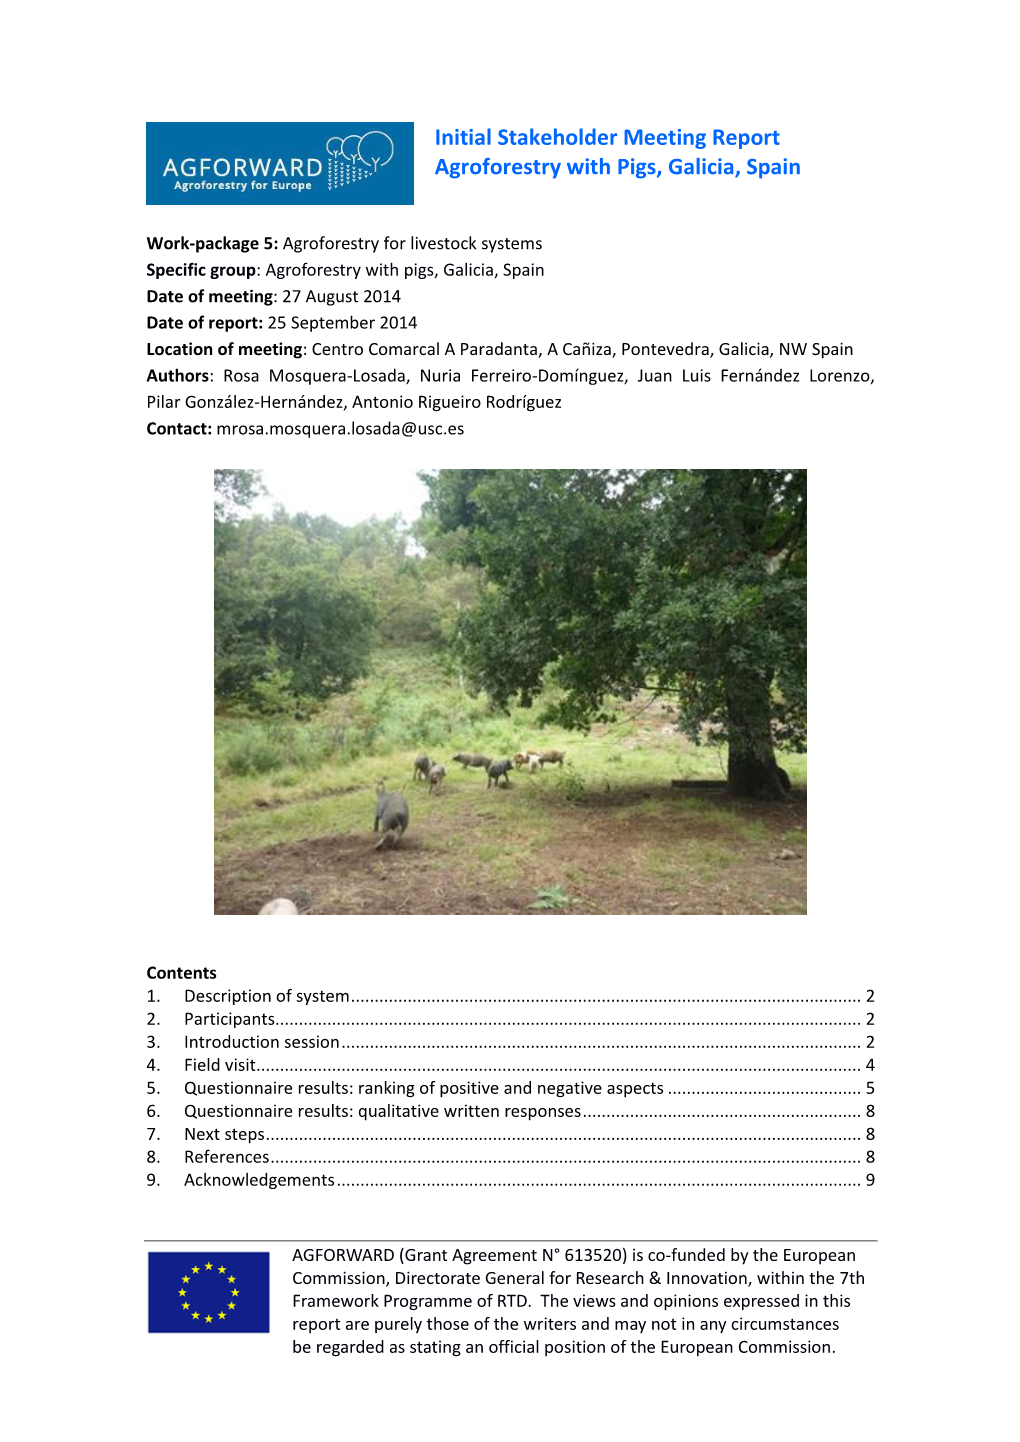 Initial Stakeholder Meeting Report Agroforestry with Pigs, Galicia, Spain